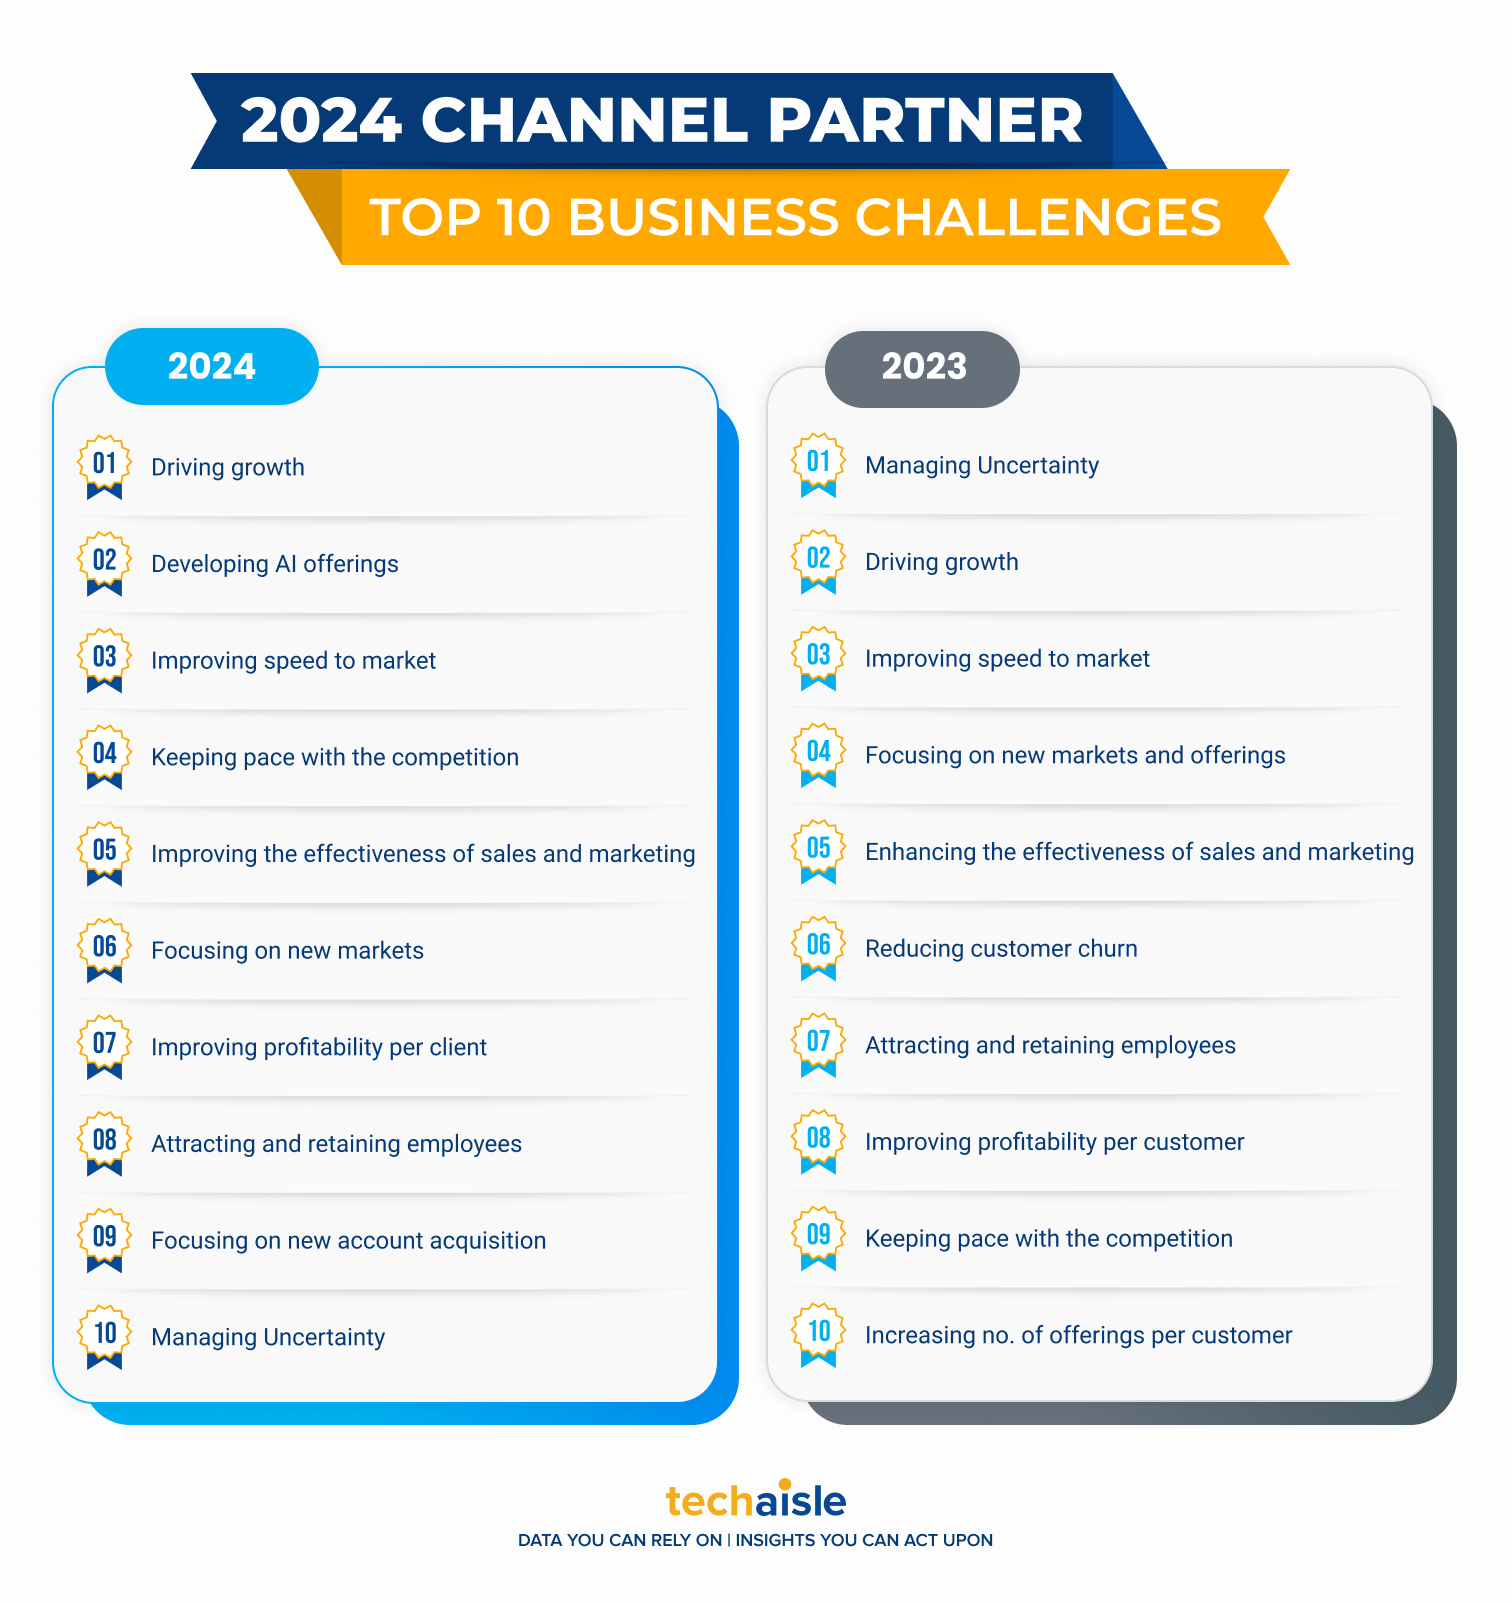 2024 techaisle channel partners top 10 business priorities